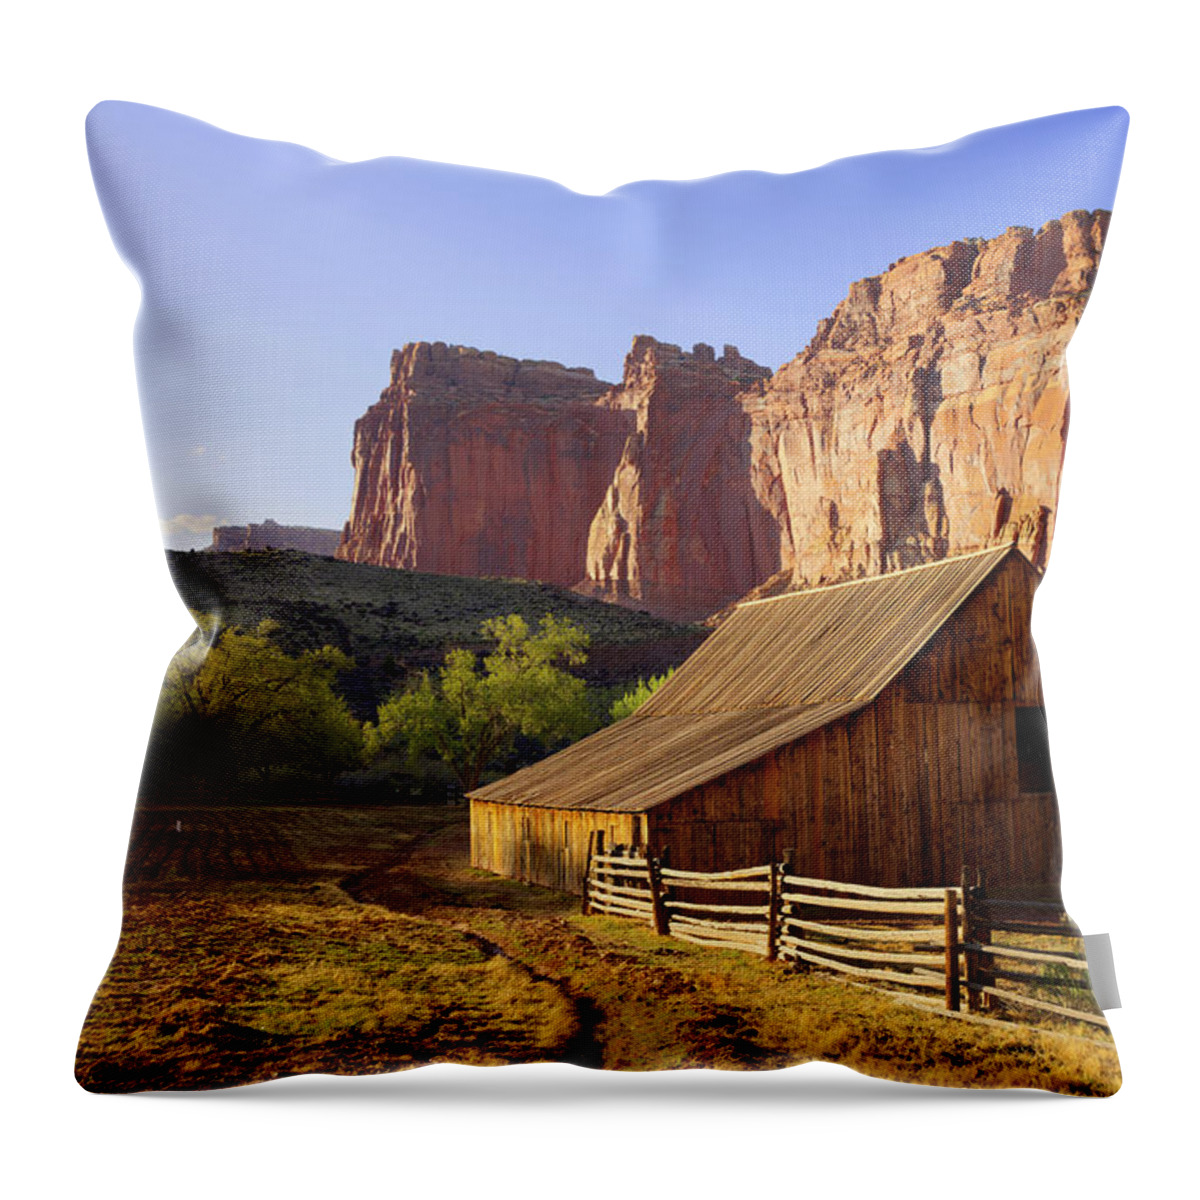 Utah Throw Pillow featuring the photograph Capitol Barn by Chad Dutson